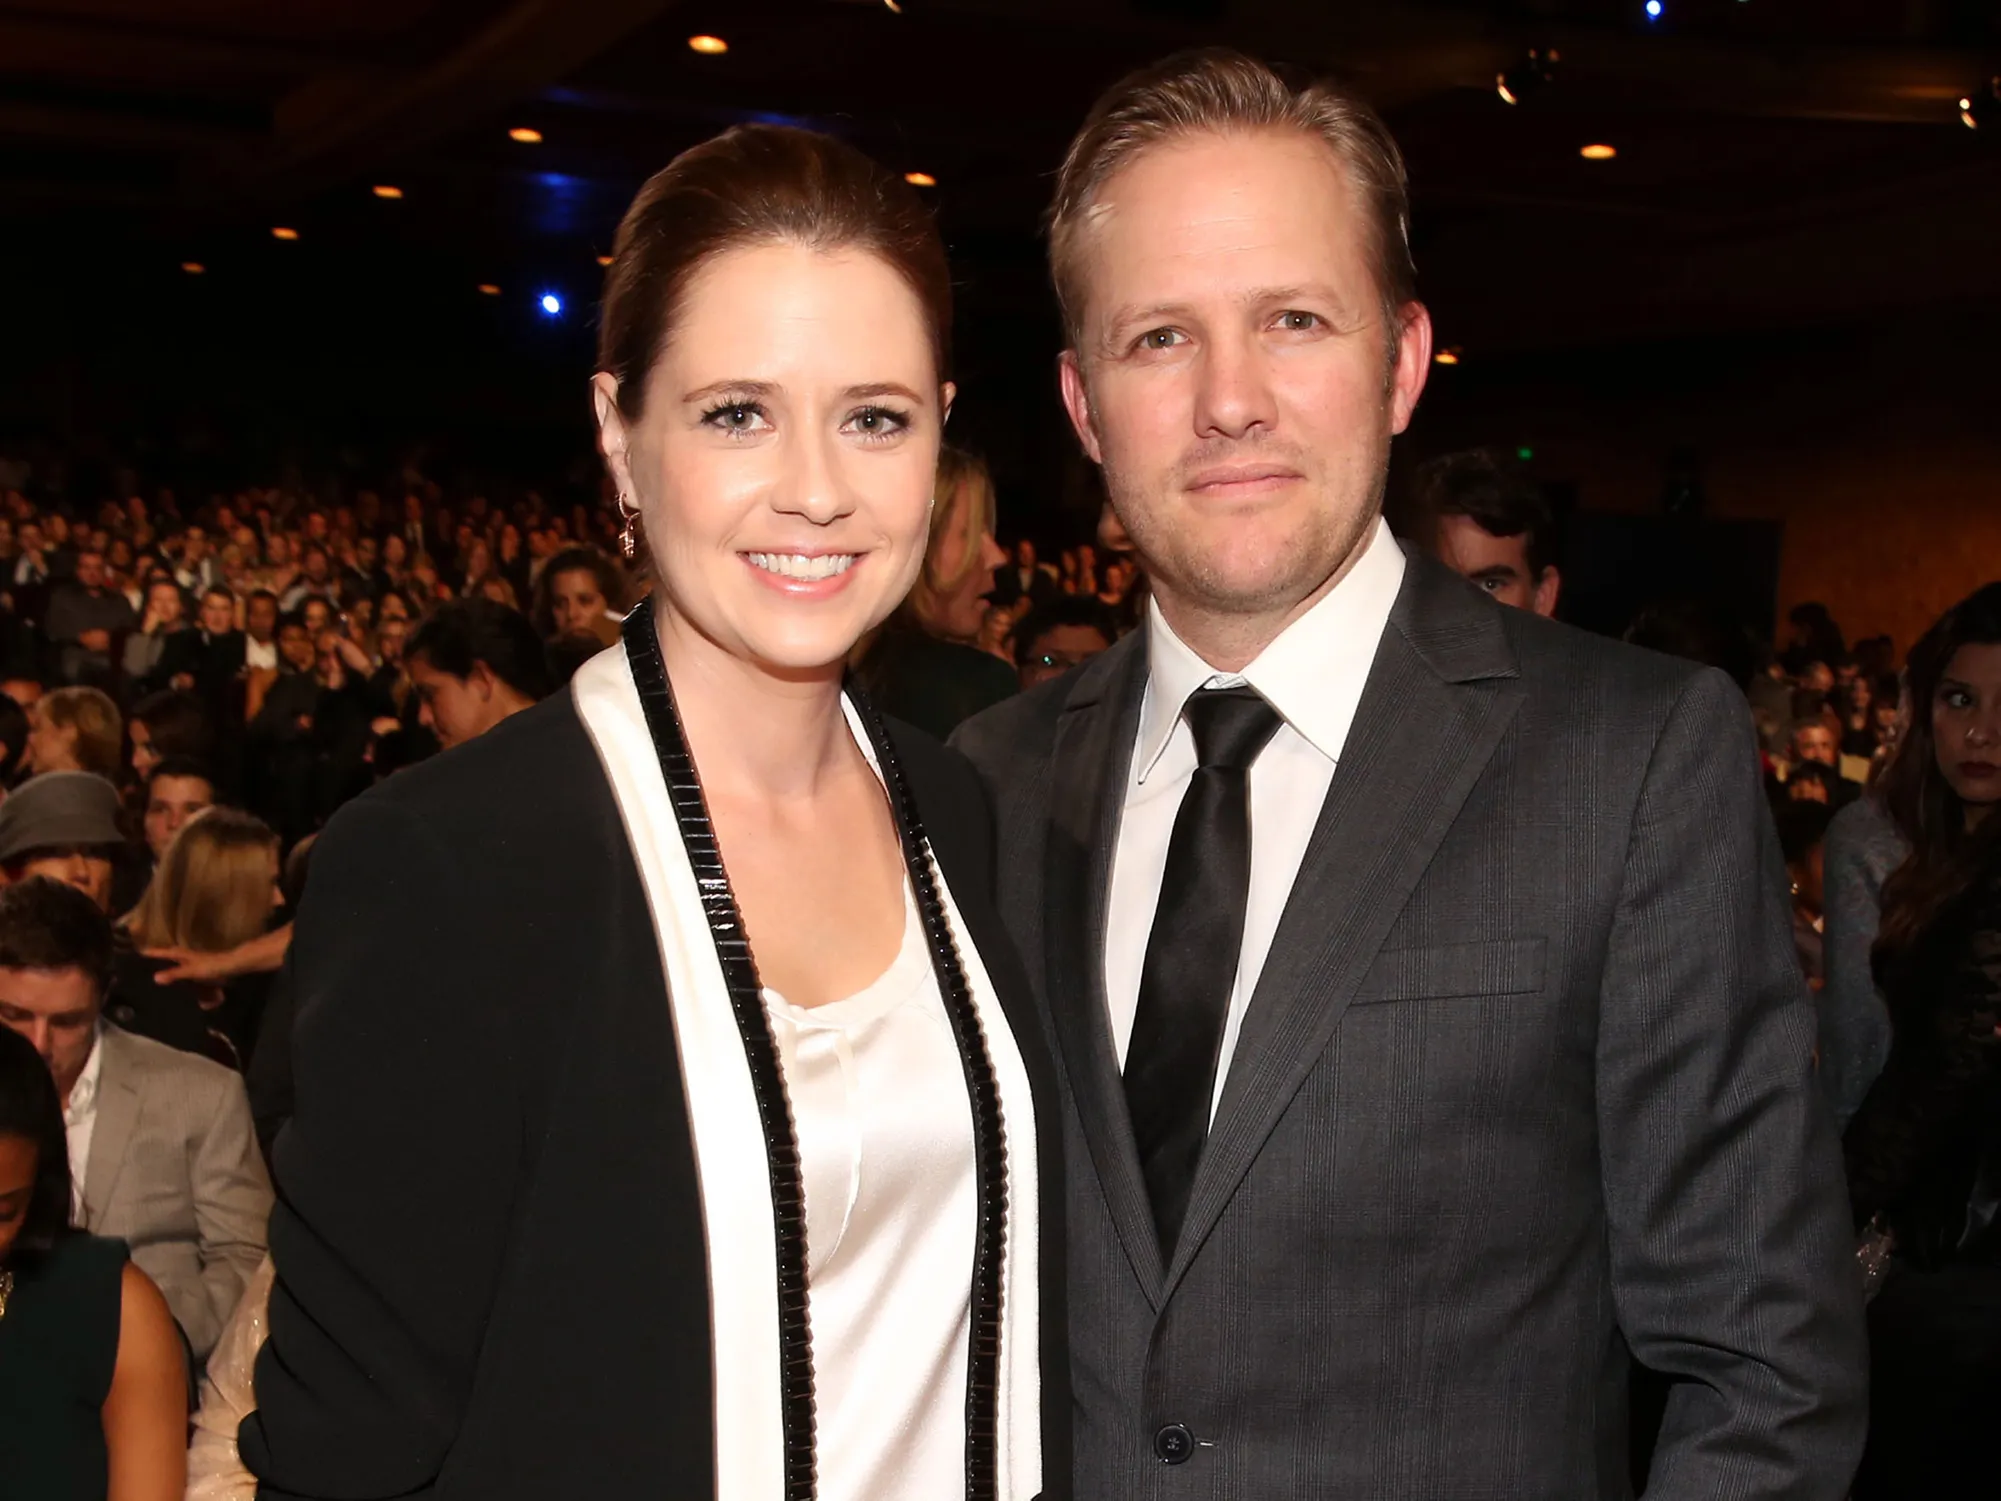 Jenna Fischer with her husband Lee Kirk